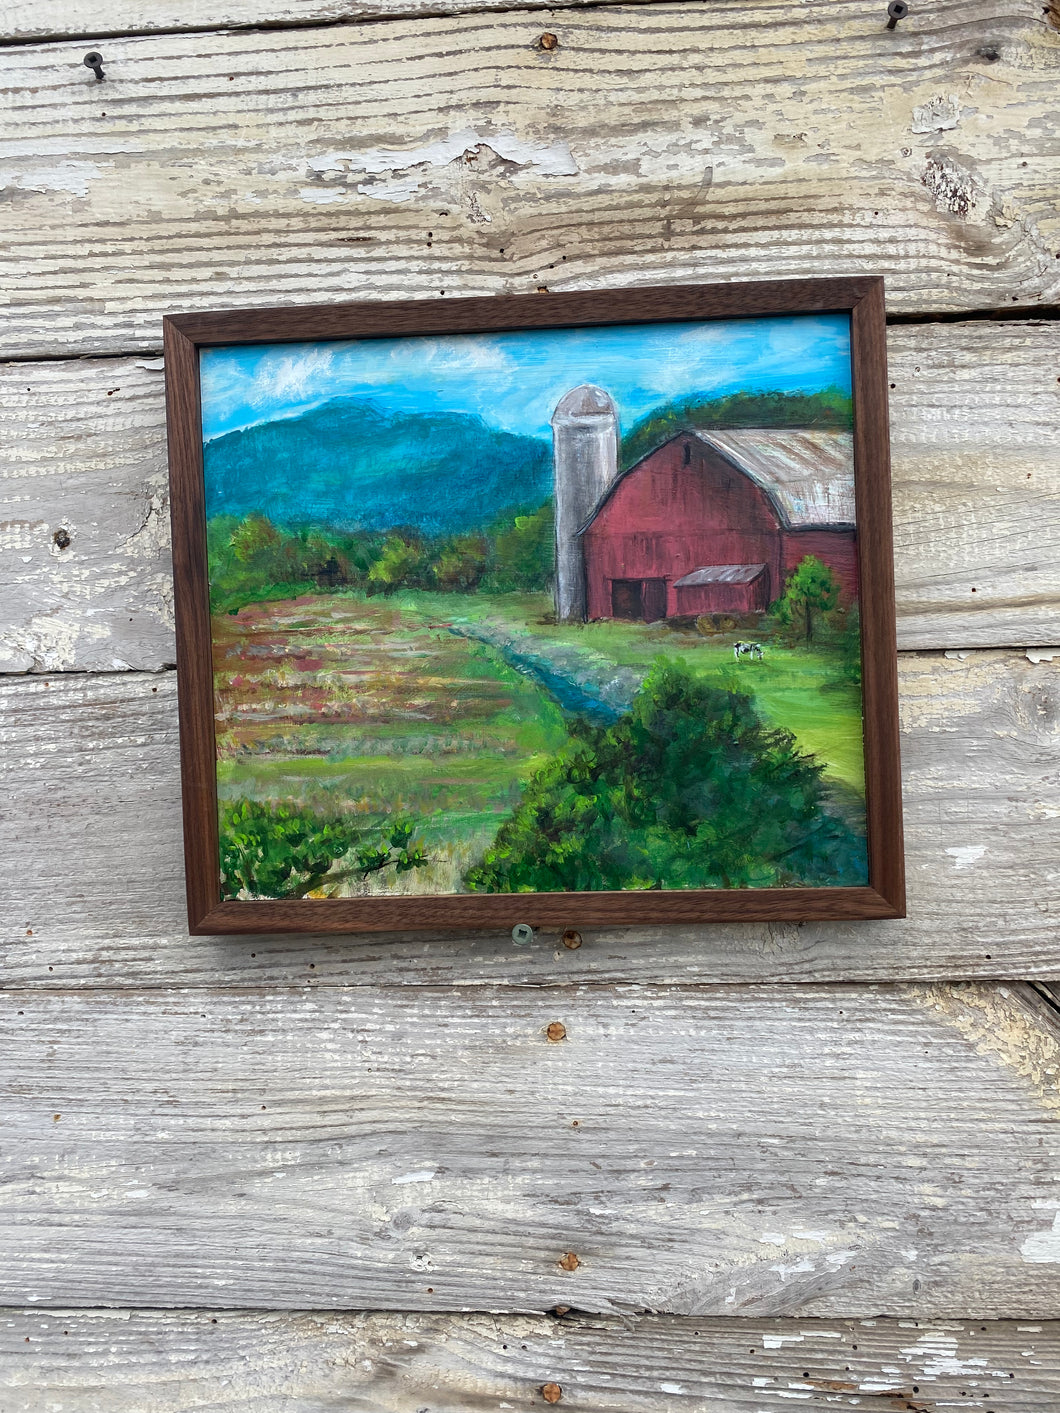 Red Barn #18 reclaimed pallet wood painting - handcrafted frame!